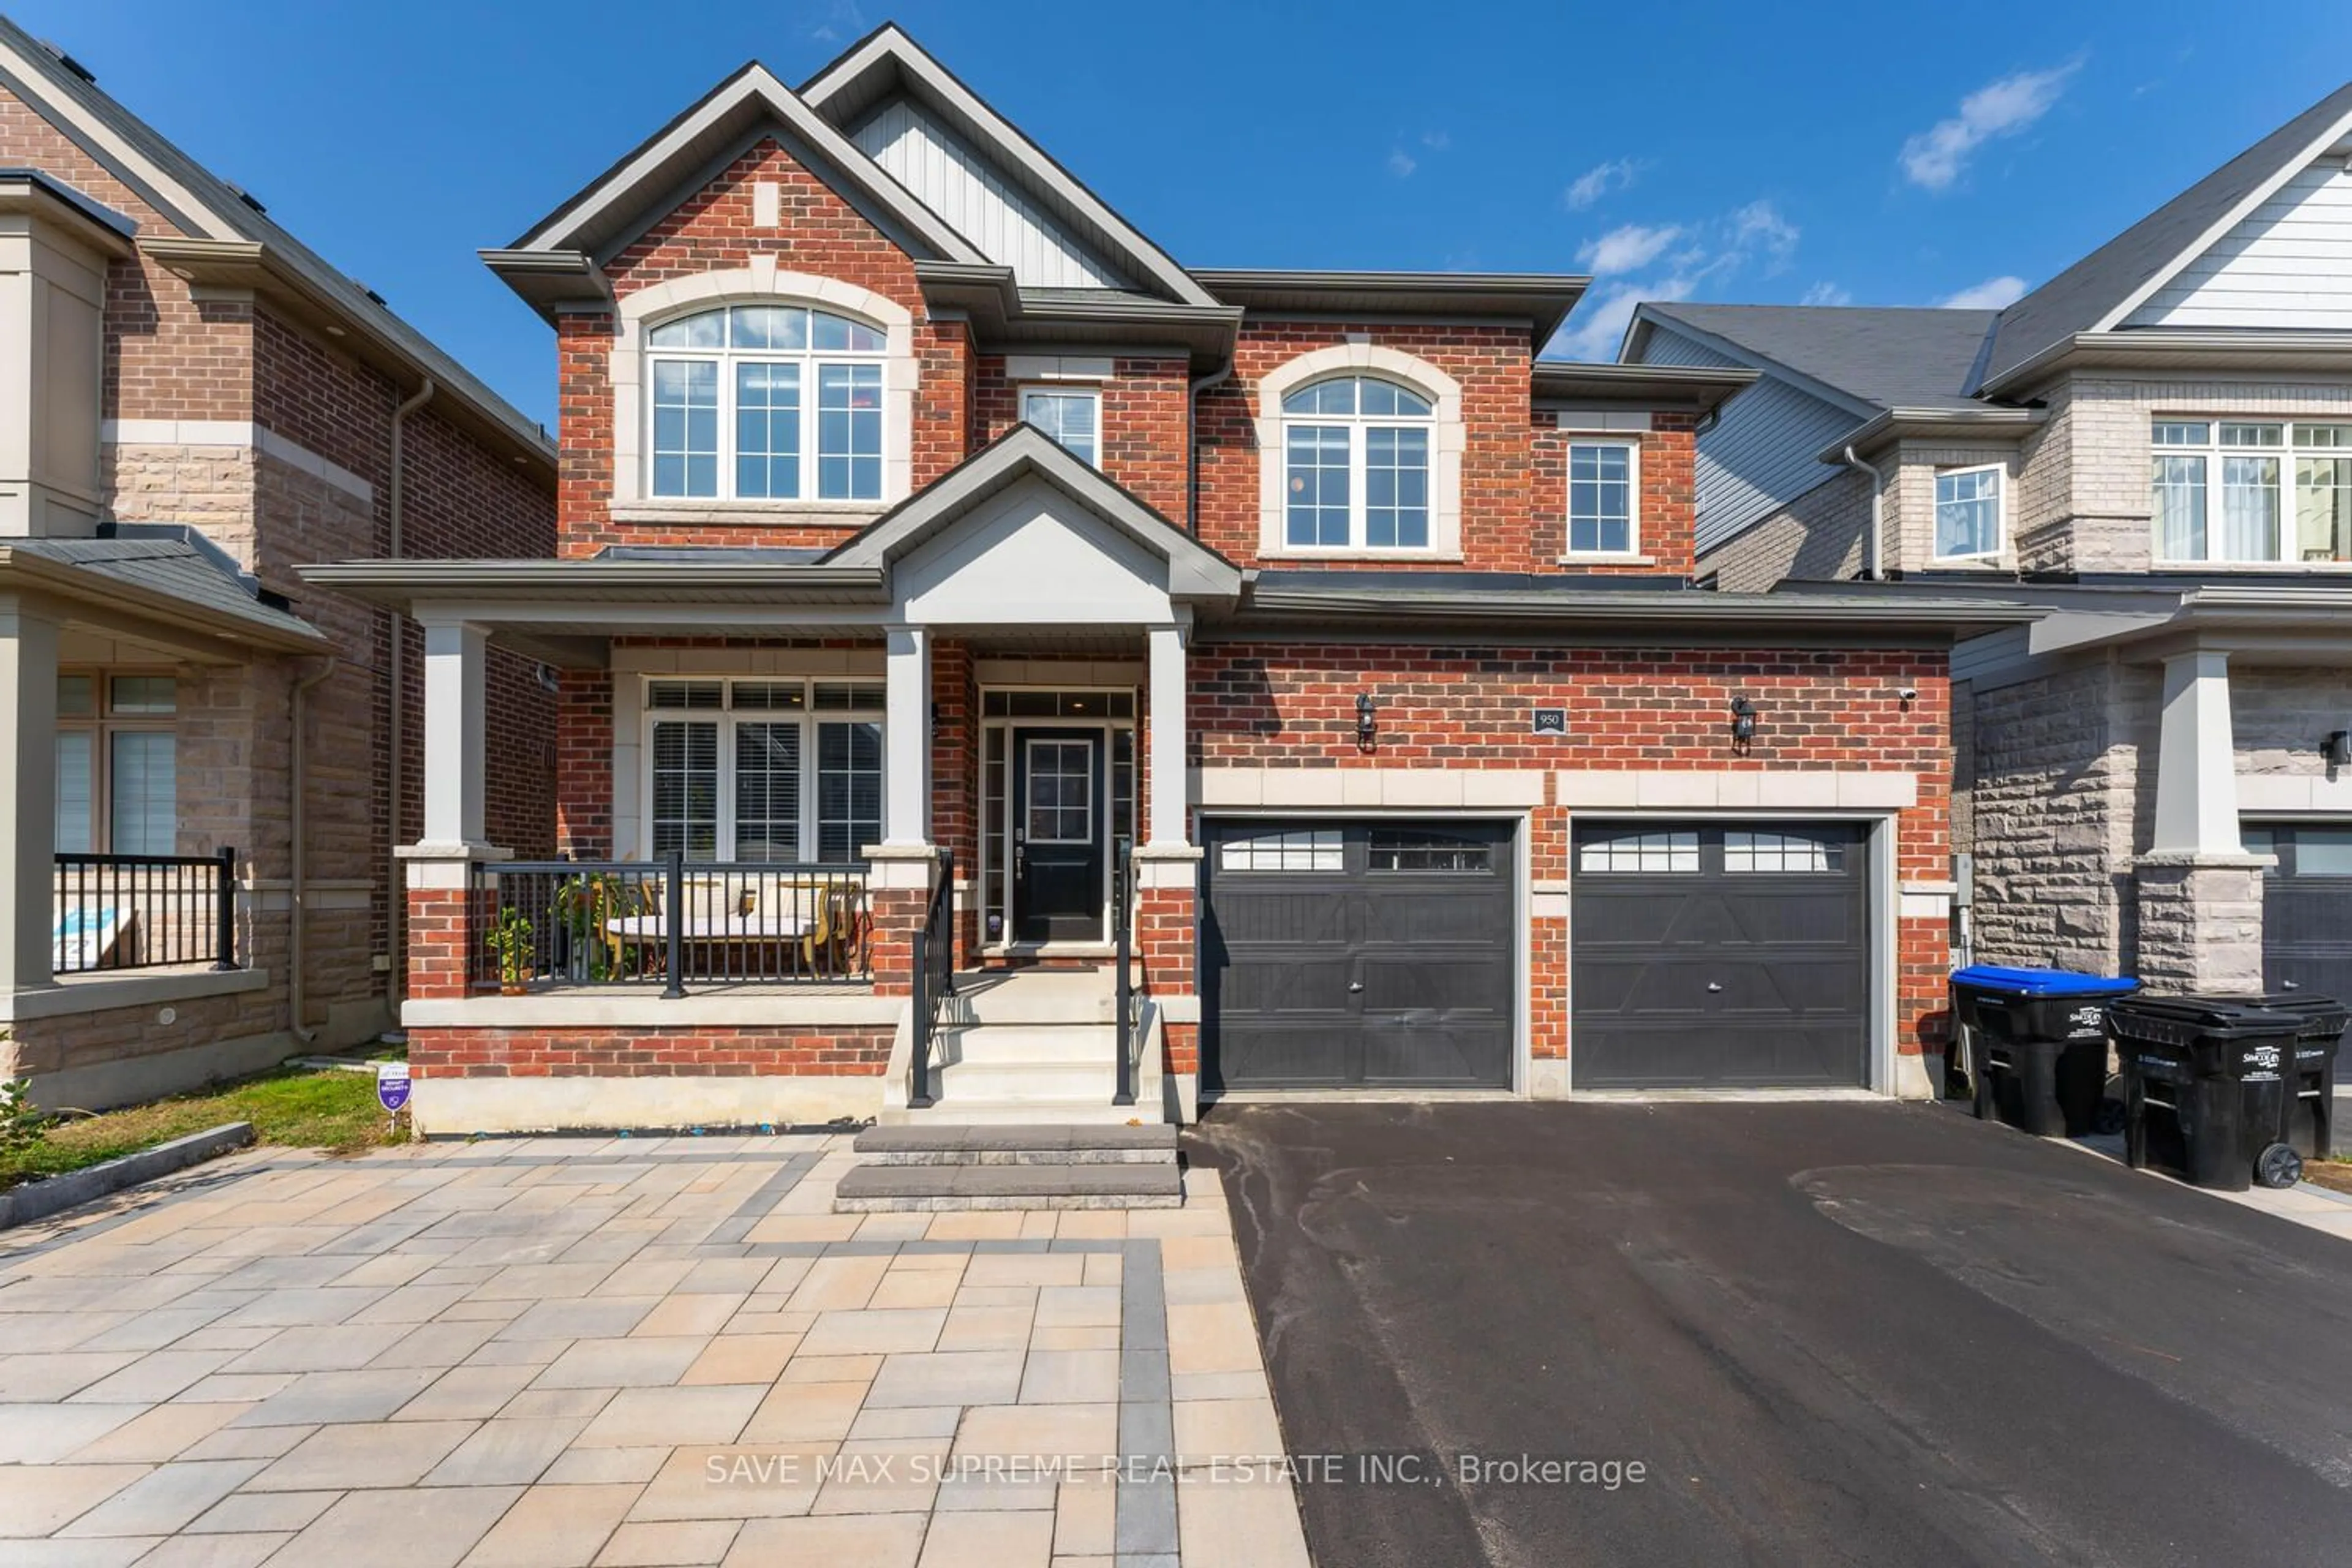 Home with brick exterior material for 950 Cole St, Innisfil Ontario L9S 0J9